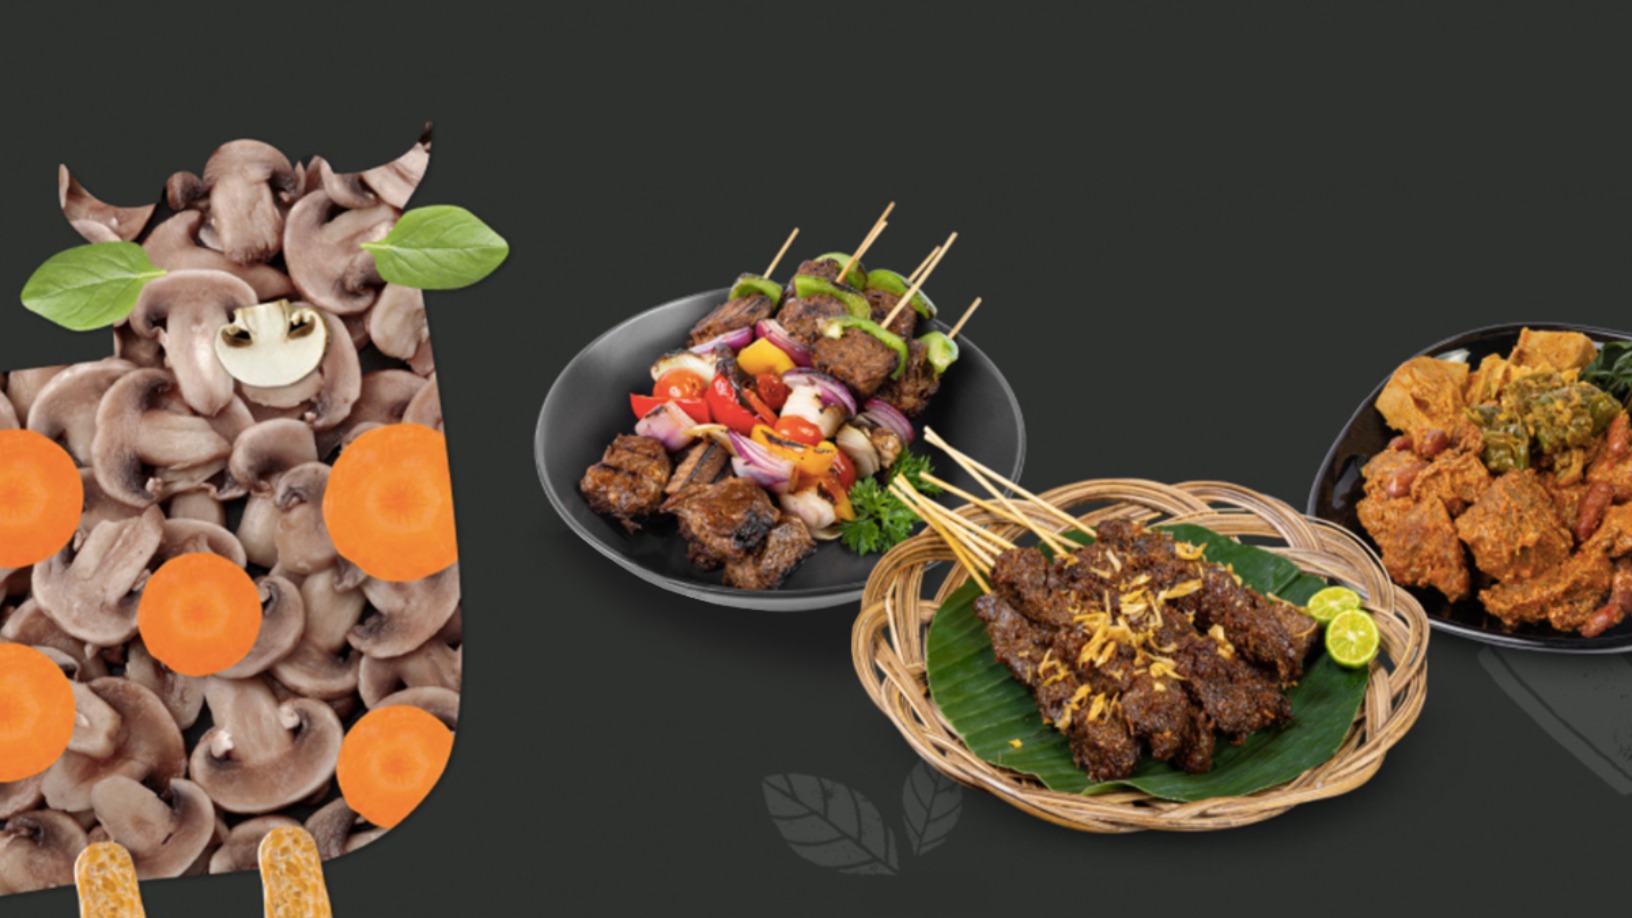 Indonesia's Green Rebel Foods to take its Asian-inspired plant-based meat regional